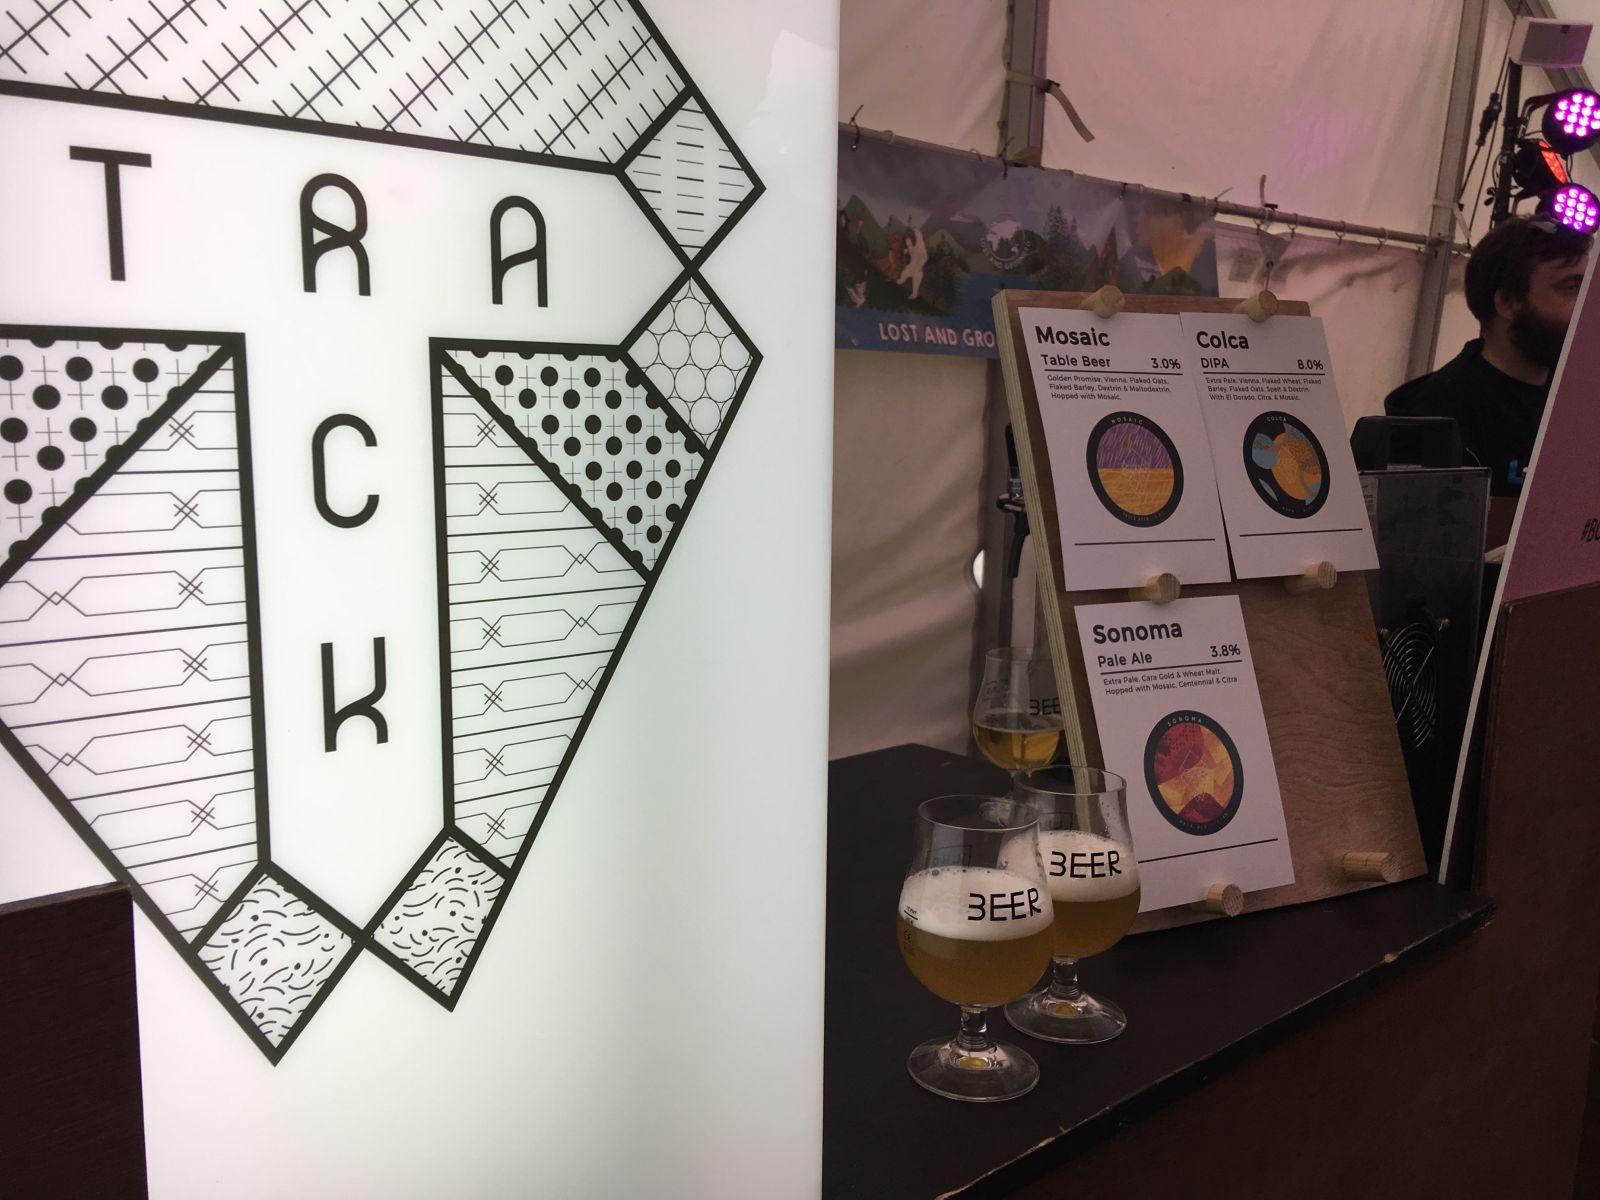 Track's Sonoma was one of the best beers we tried at the 2018 BCBF.